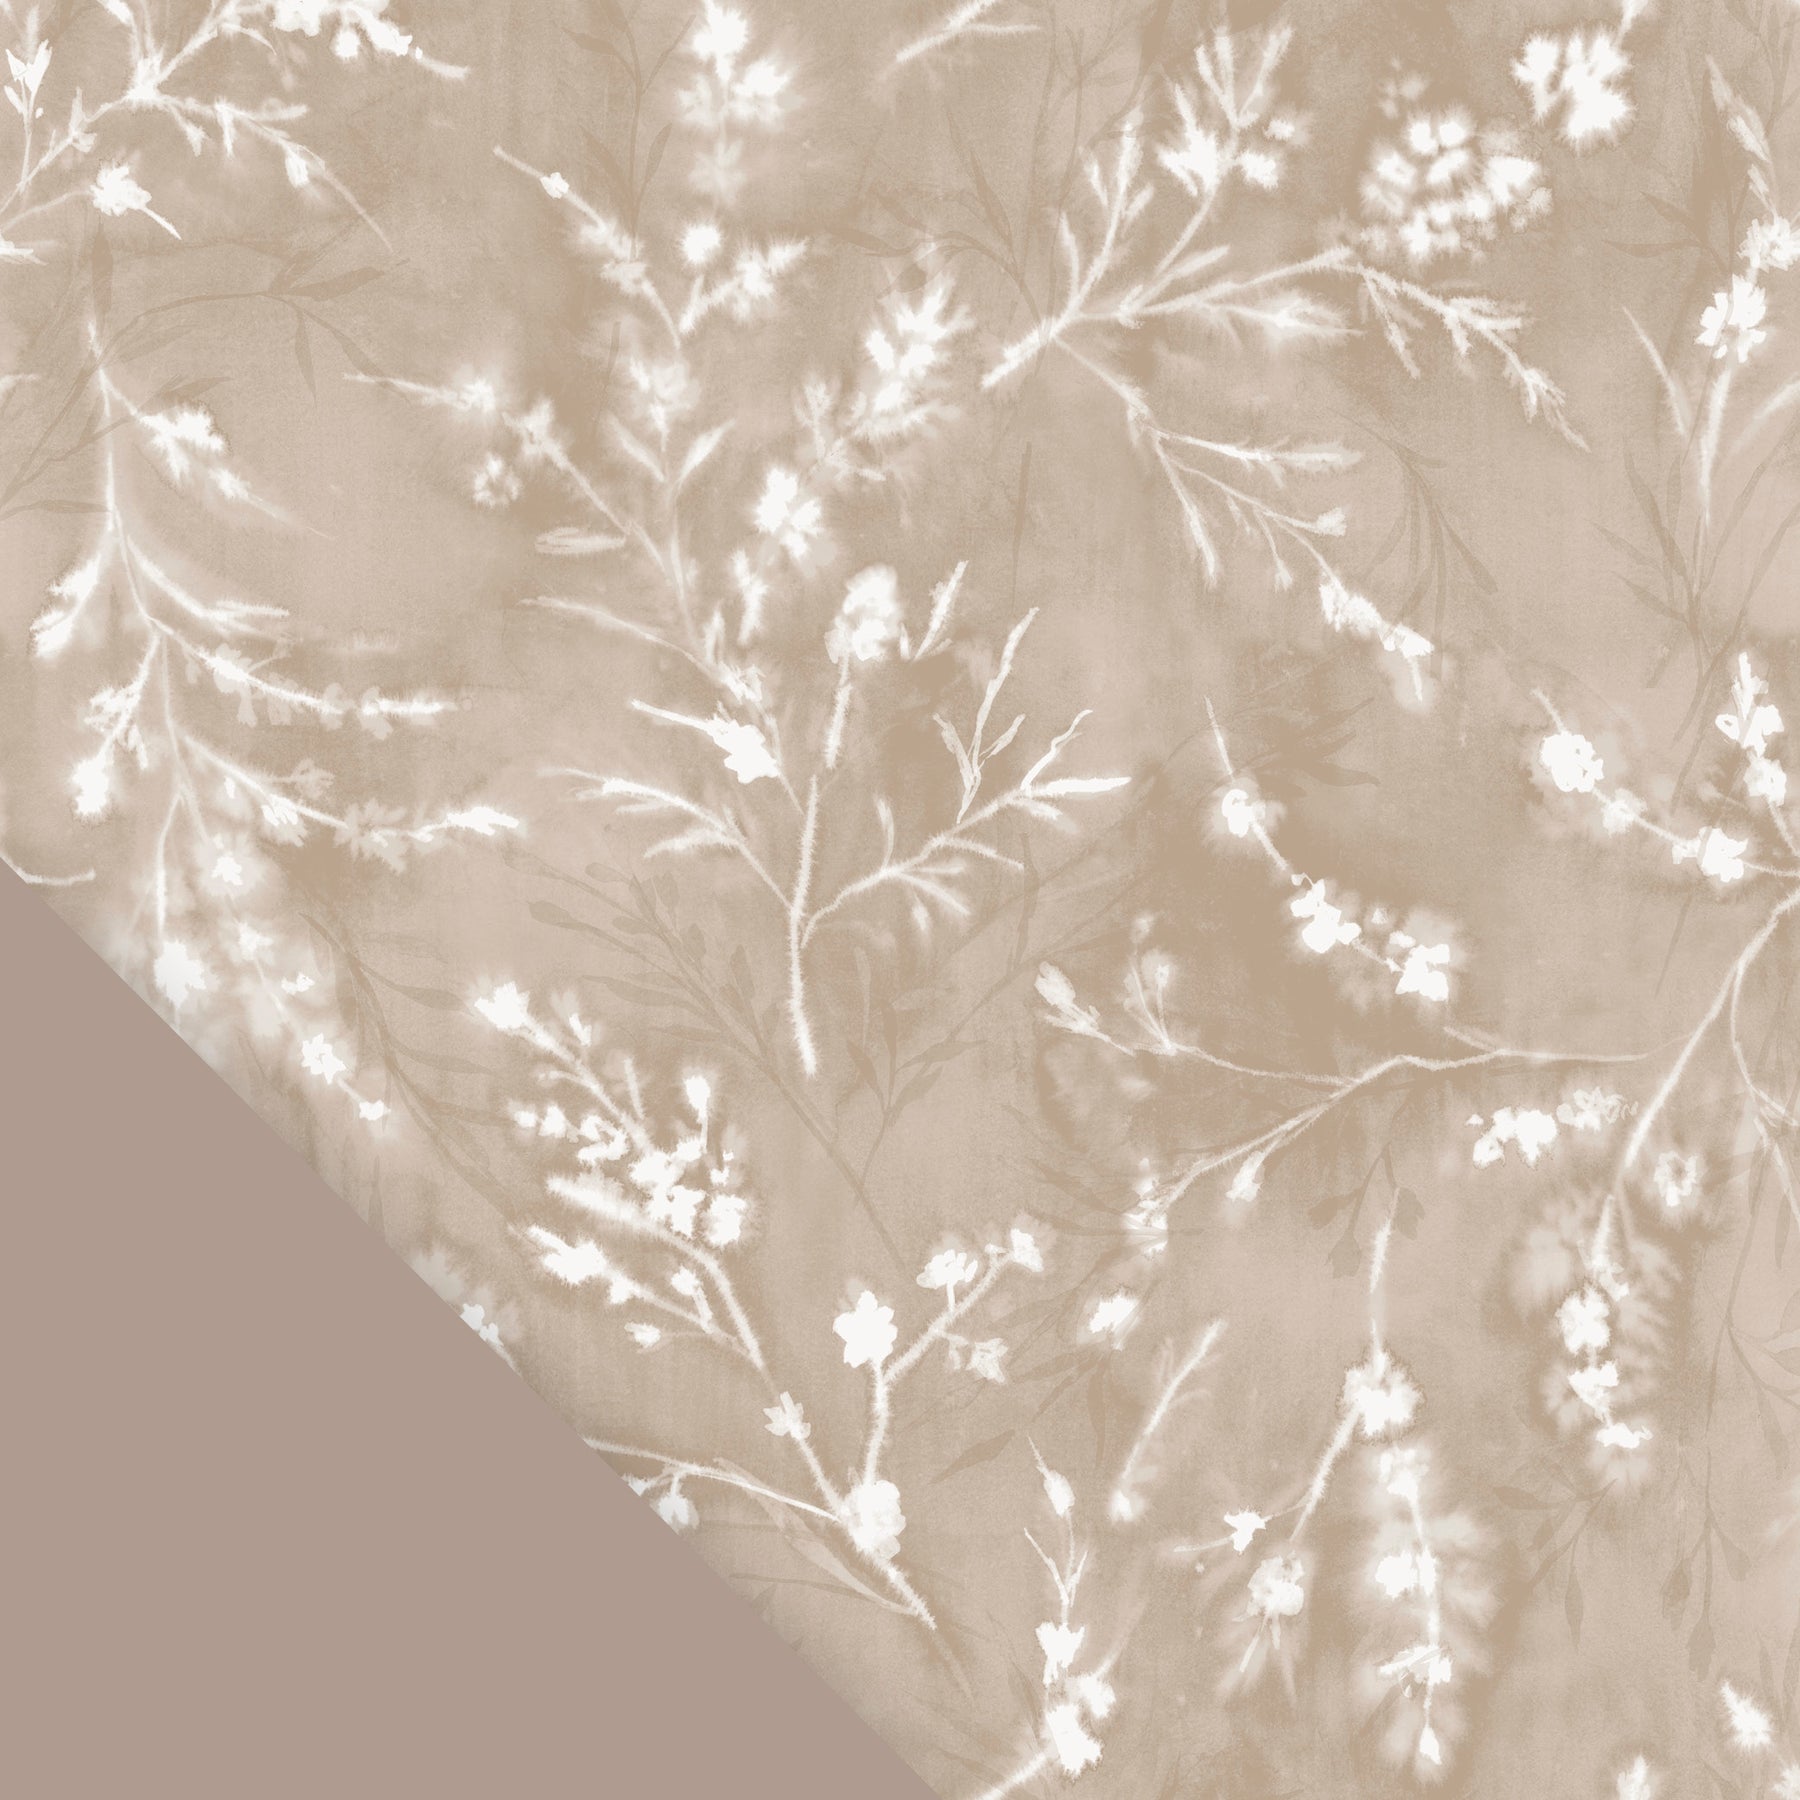 Close-up image of the Floral Oatmeal pattern with a small section of the plain Oatmeal color in the bottom left corner